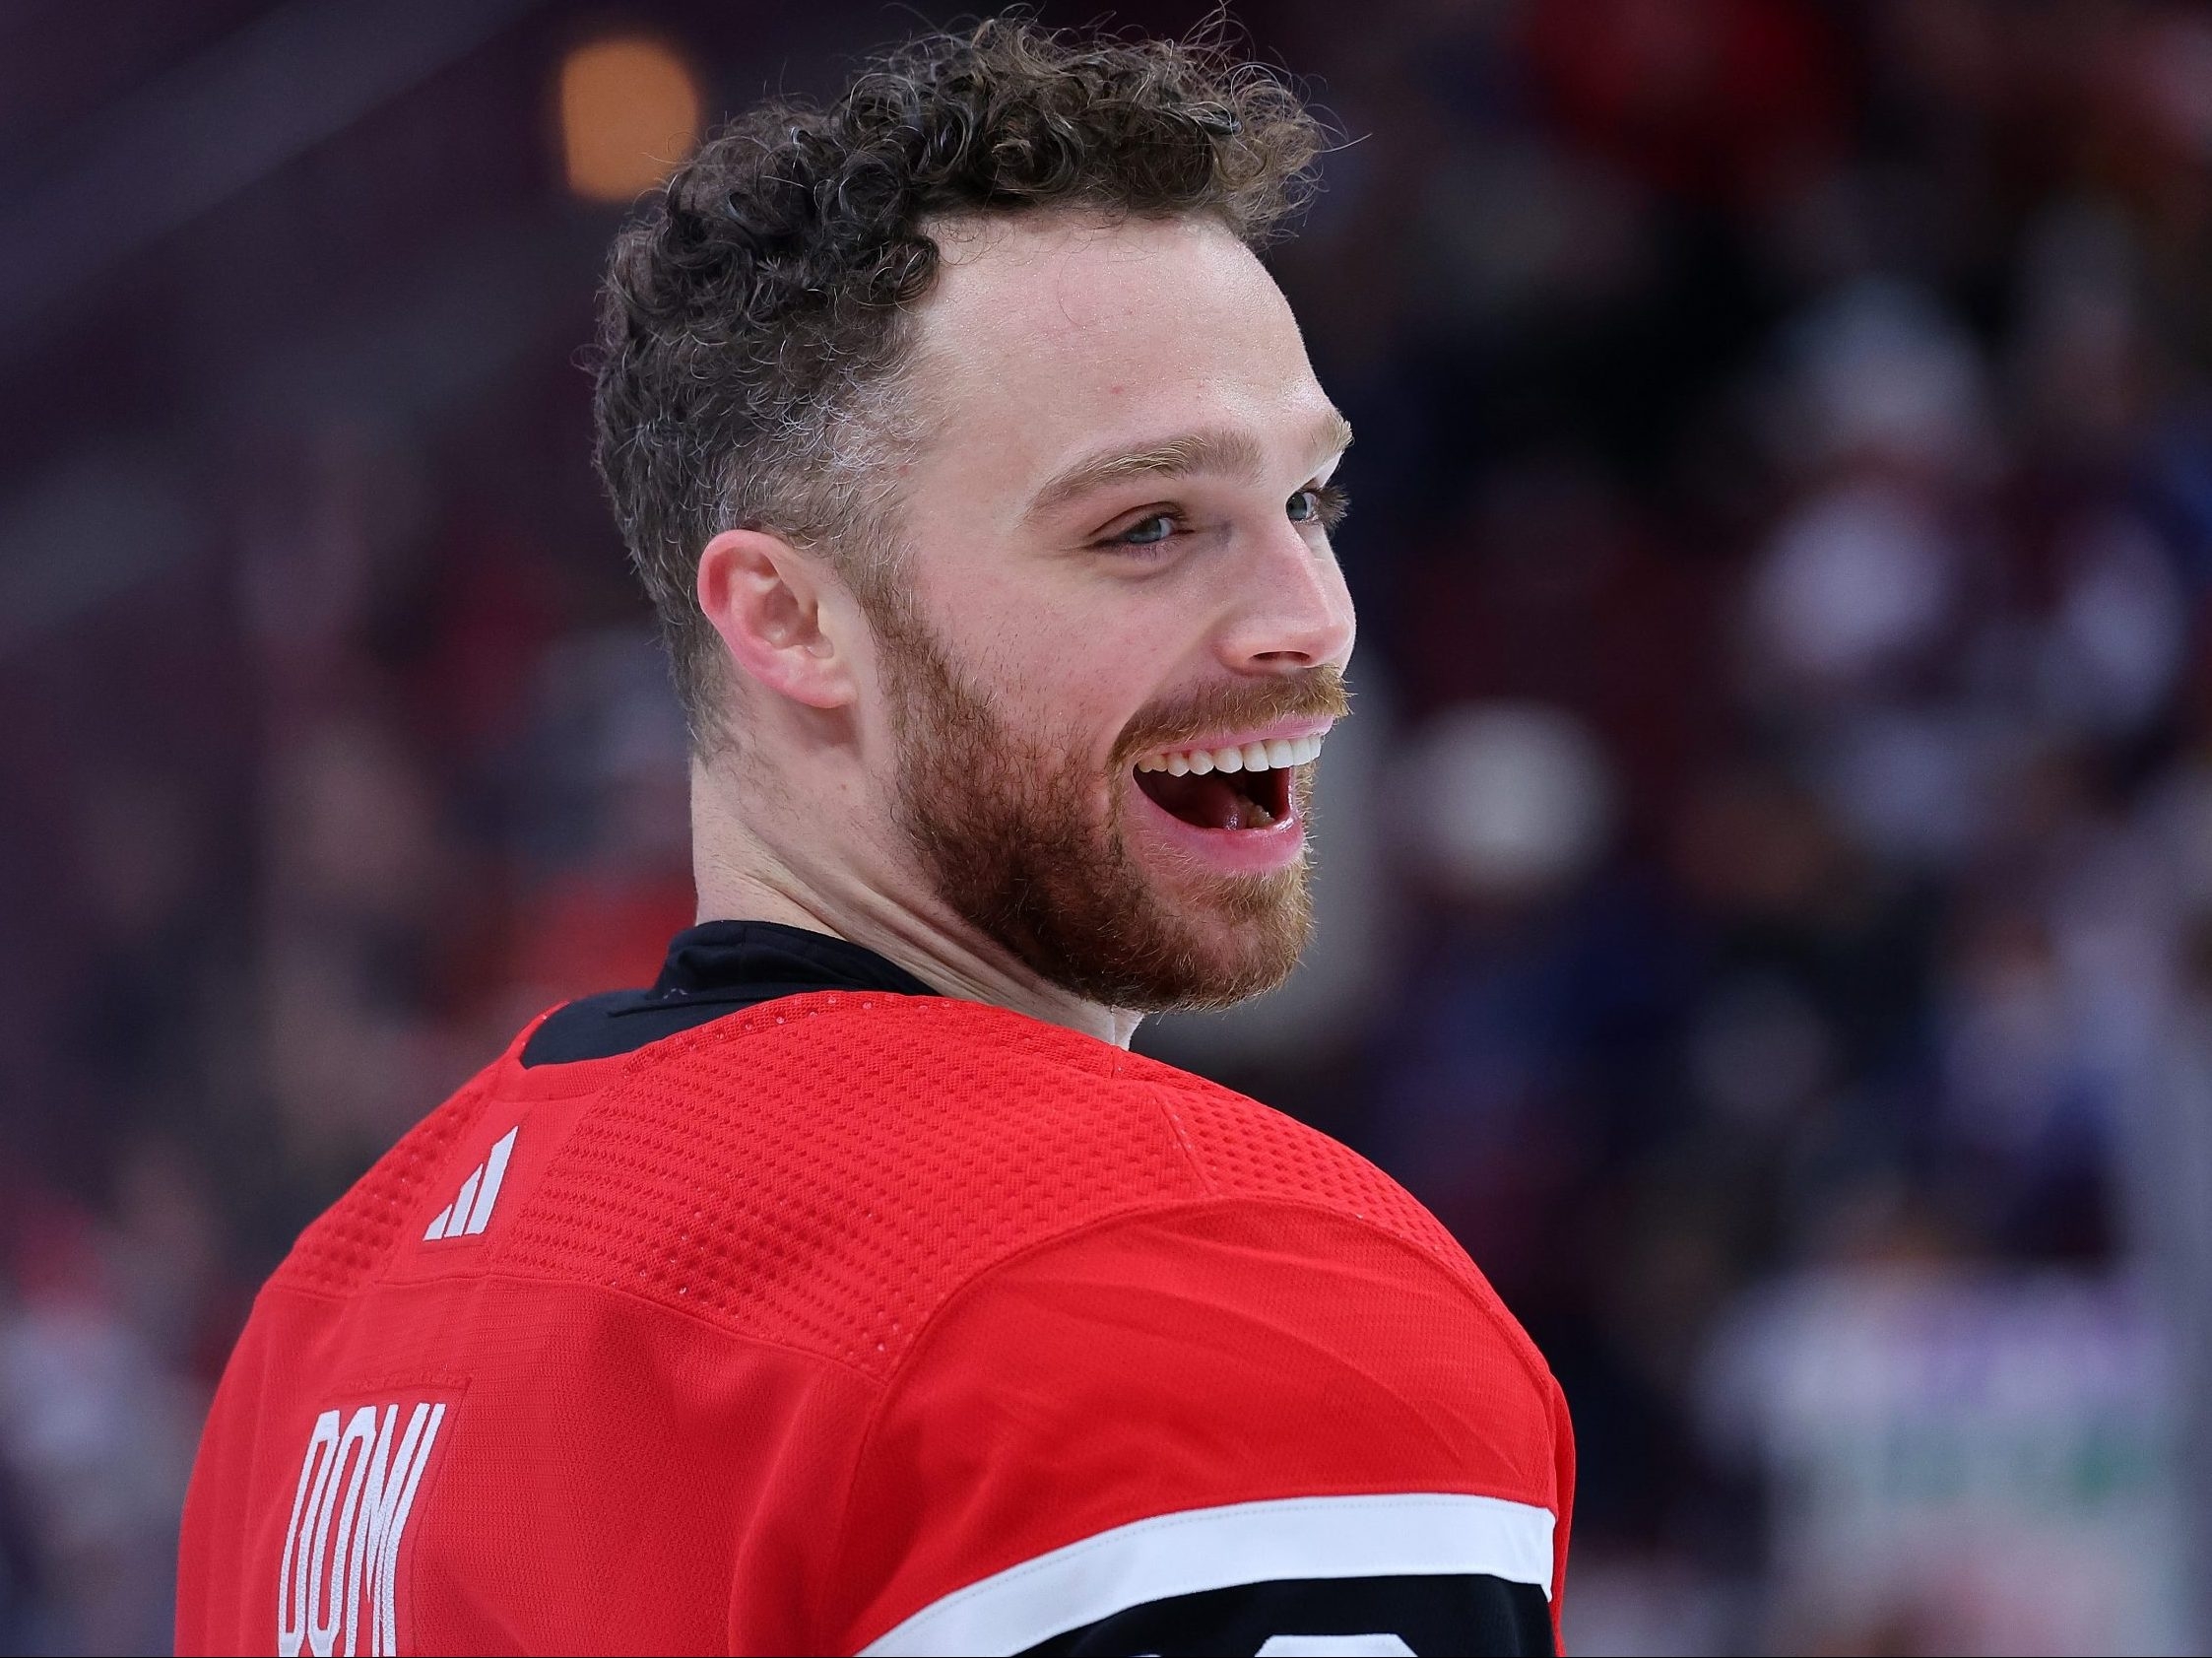 Max Domi Looks to Make Name for Himself in NHL